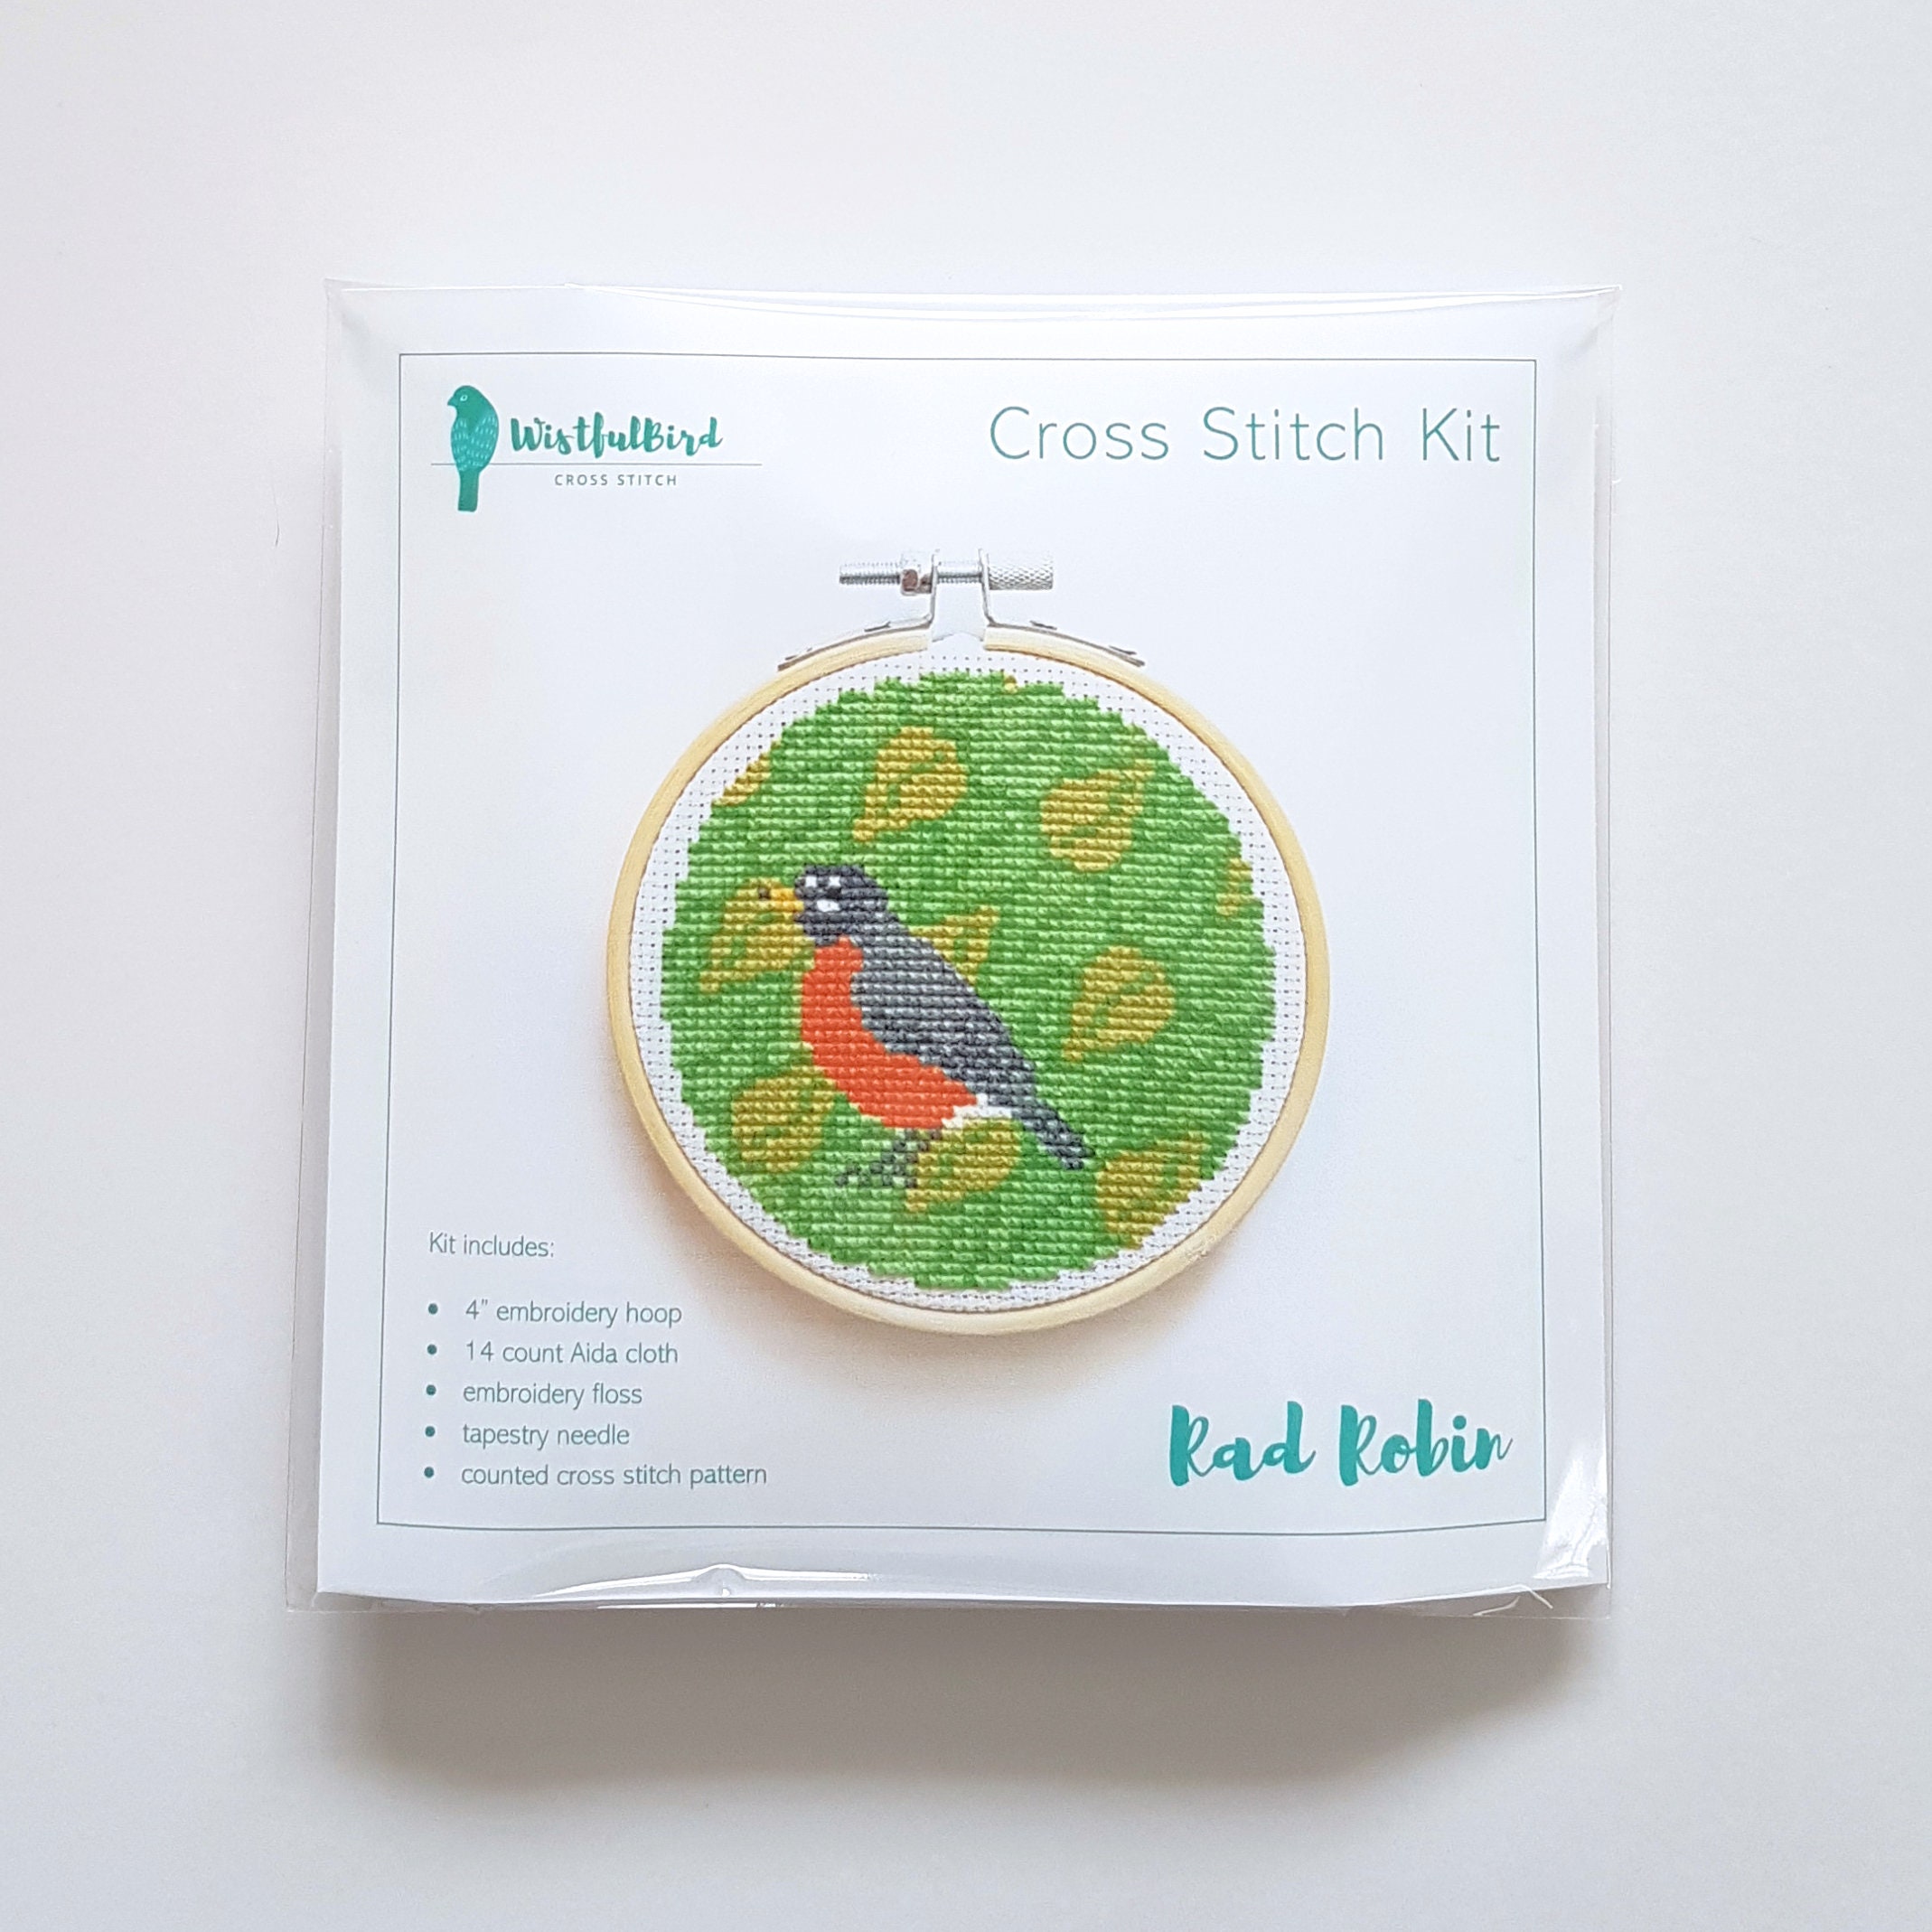 Kraftex Cross Stitch Kits: Stamped Cross Stitch Kits for Beginners. [1 Embroidery Hoop] Simple and Easy Beginner Cross Stitch Kits for Adults and